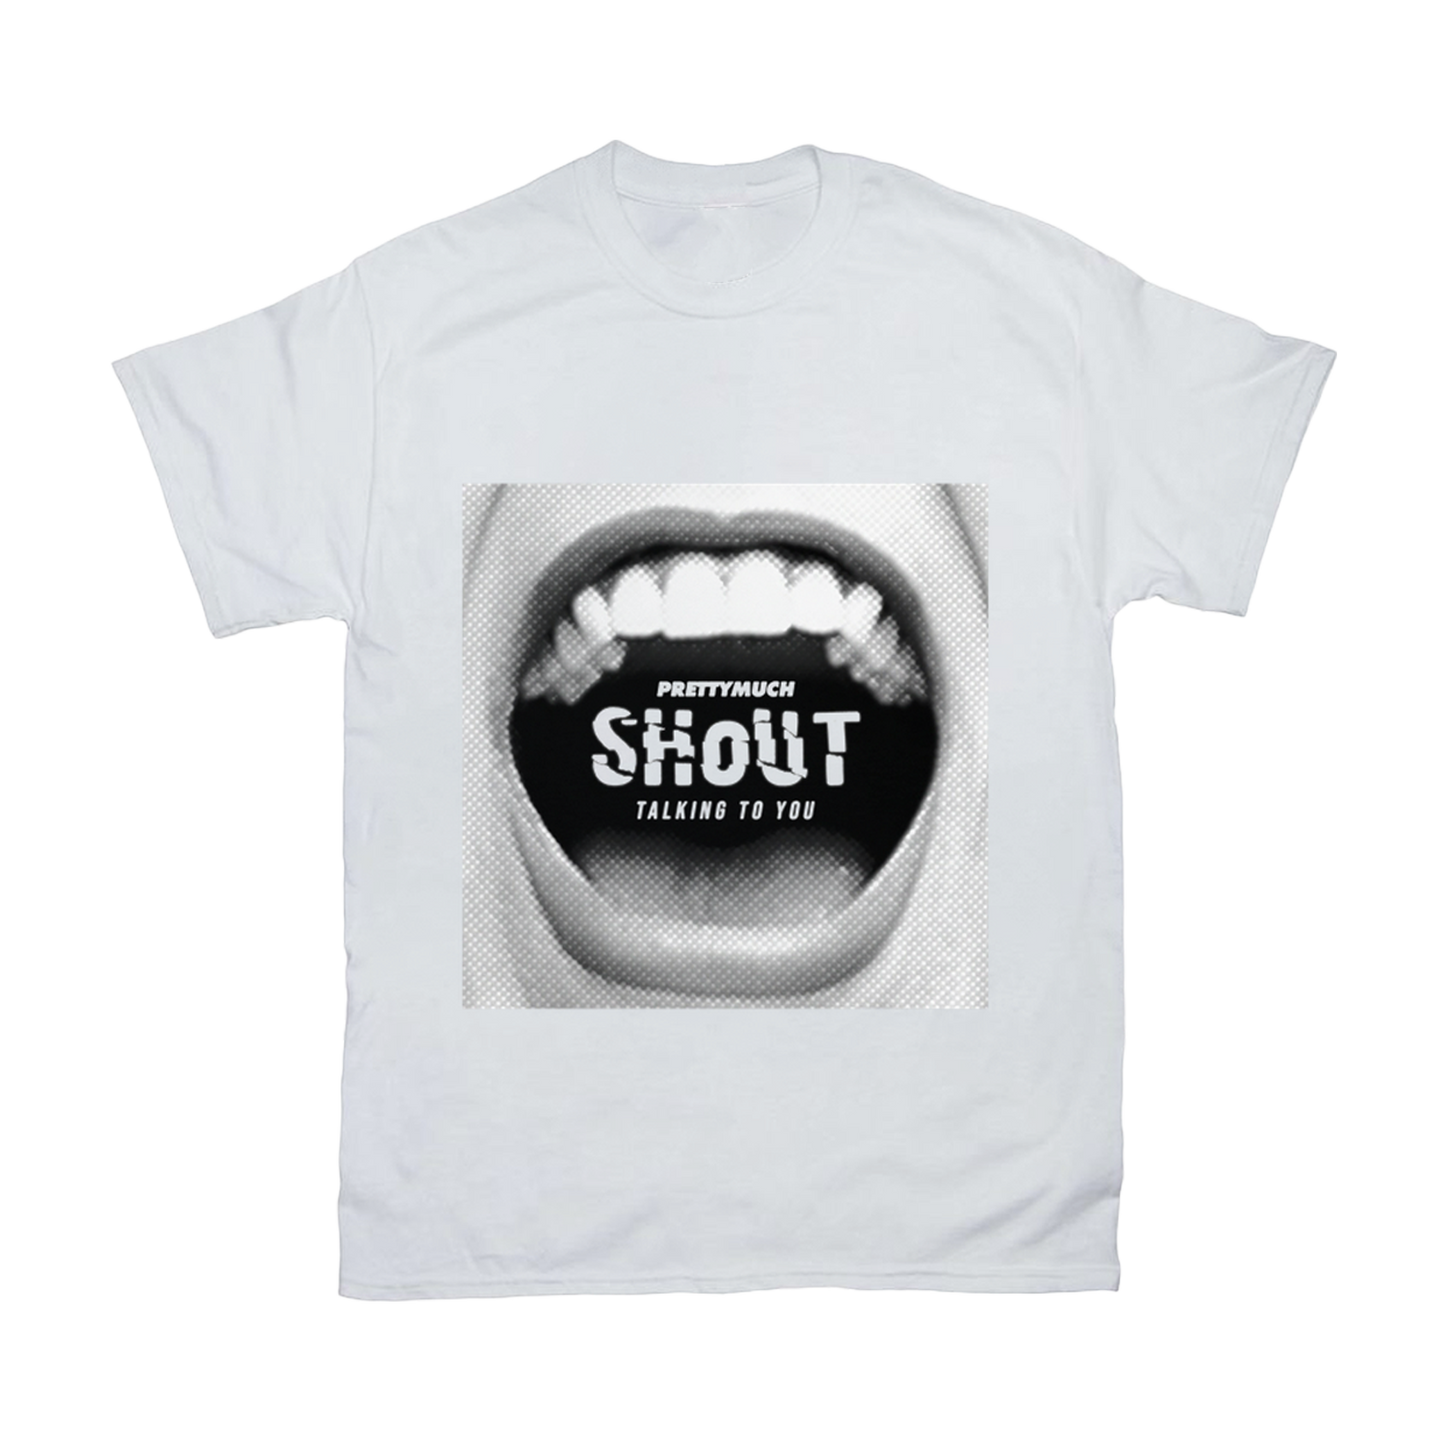 Shout (Talking To You) Tee